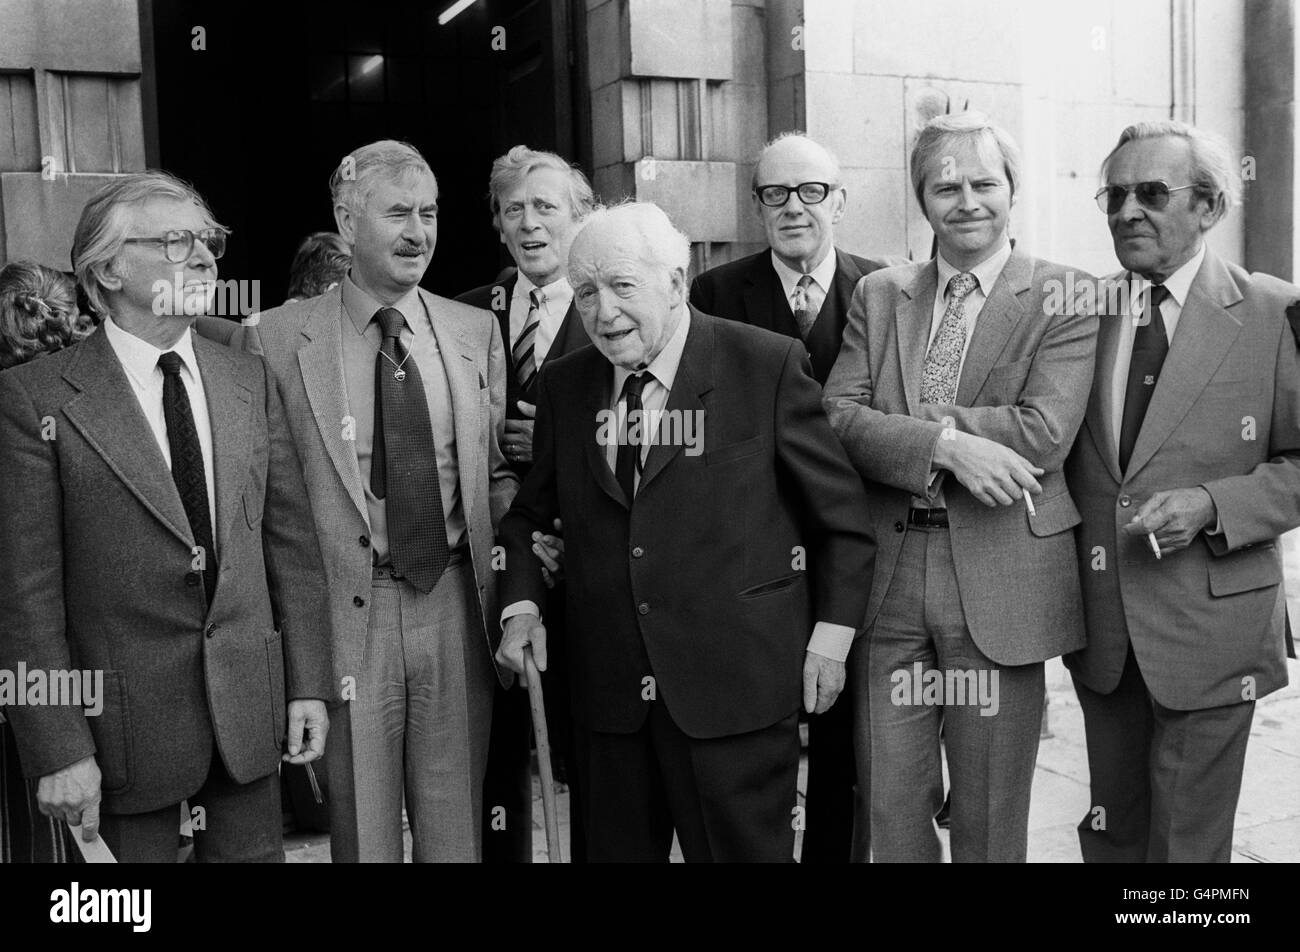 Members of the cast of Dad's Army, at St Martin-in-the-Fields Church after a memorial service for the actor Arthur Lowe (Captain Mainwaring in the programme) who died recently. (l-r) Clive Dunn (Private Jones), Bill Pertwee (ARP Warden), Jimmy Perry (author), Arnold Ridley (Private Godfrey), Frank Williams (The Reverend Timothy Farthing), Ian Lavender (Corporal Pike) and John Le Mesurier (Sgt Wilson). Stock Photo